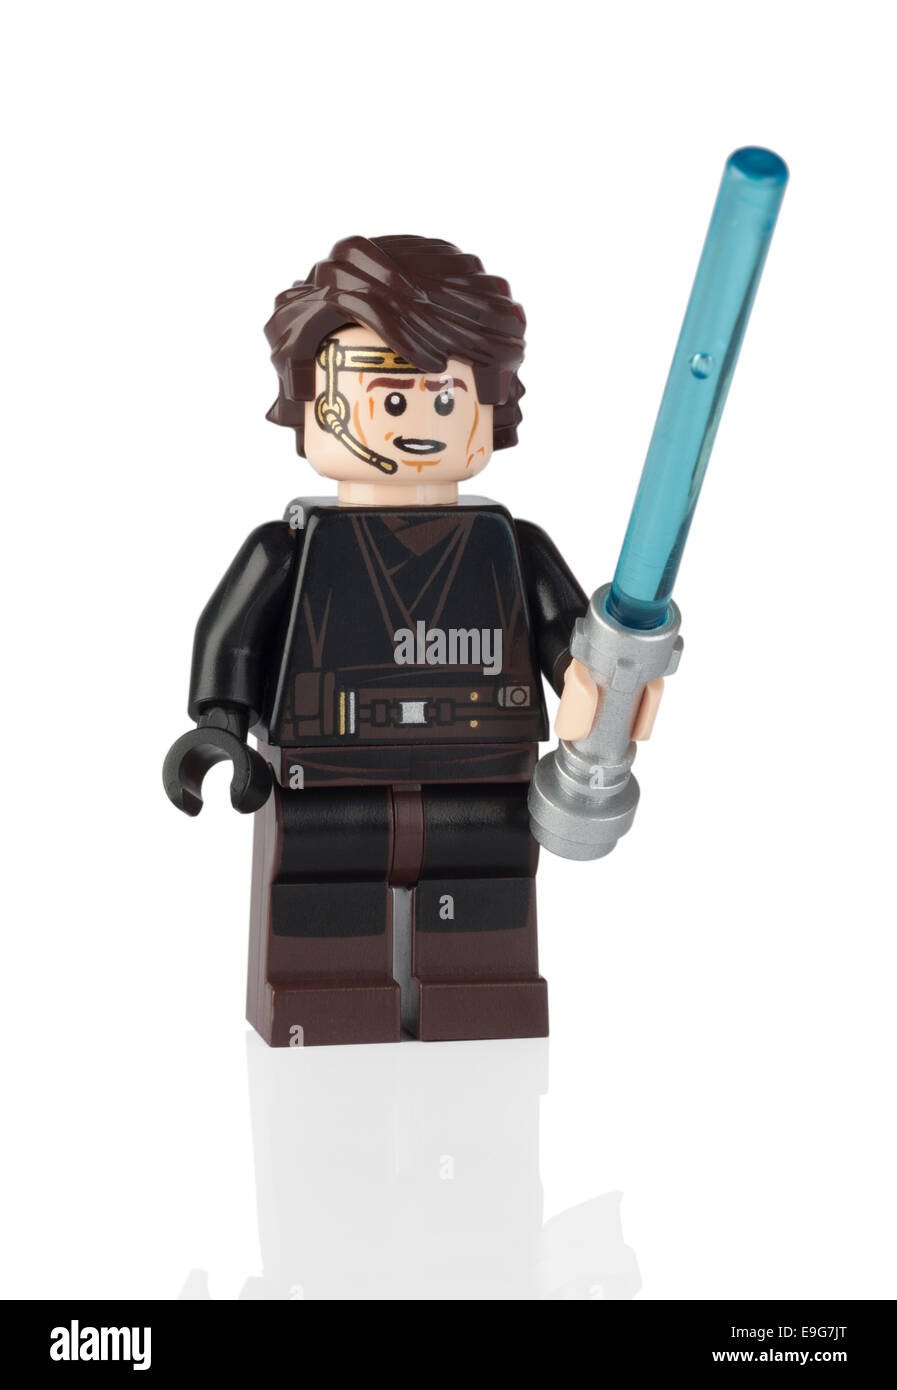 Tambov, Russian Federation - June 21, 2014 LEGO Anakin Skywalker minifigure from Star Wars set with Lightsaber. Stock Photo